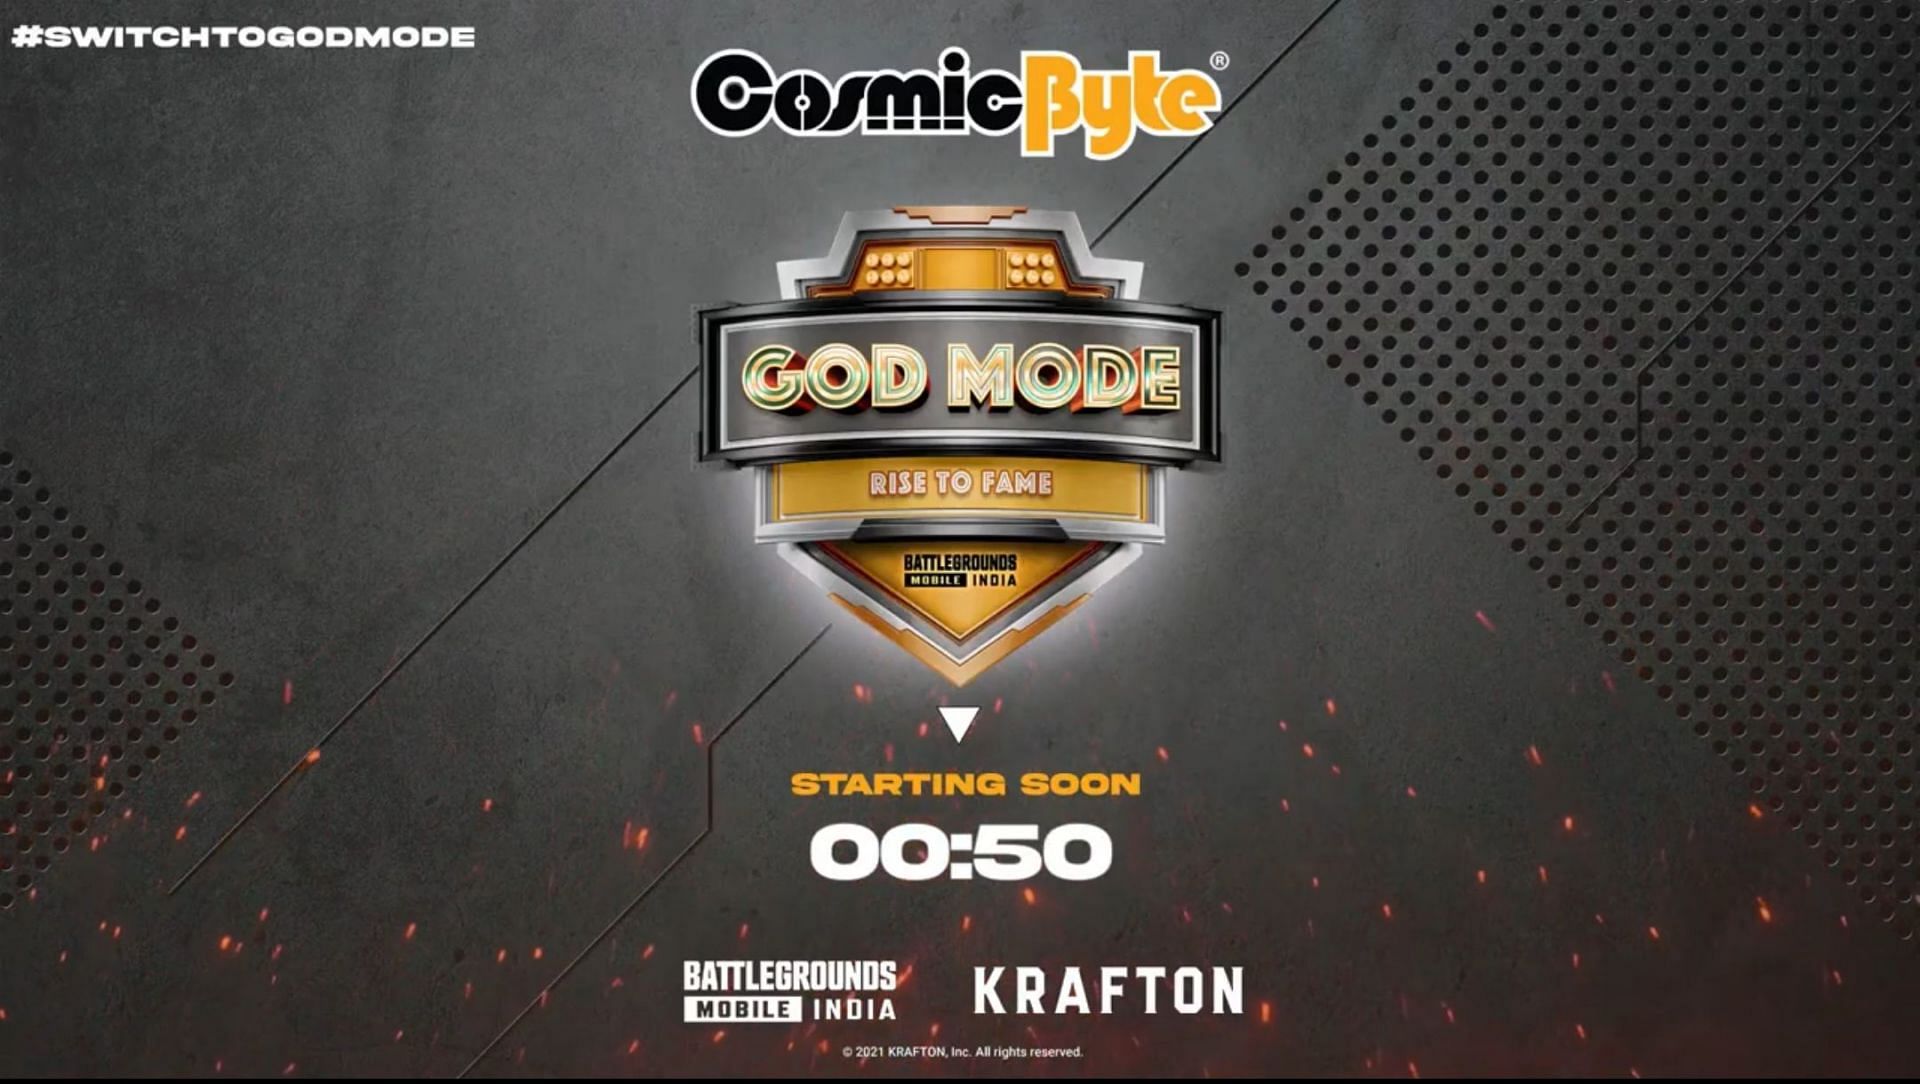 BGMI God Mode: Rise To Fame play-offs is all set to begin on October18 (Image via The Esports Club)